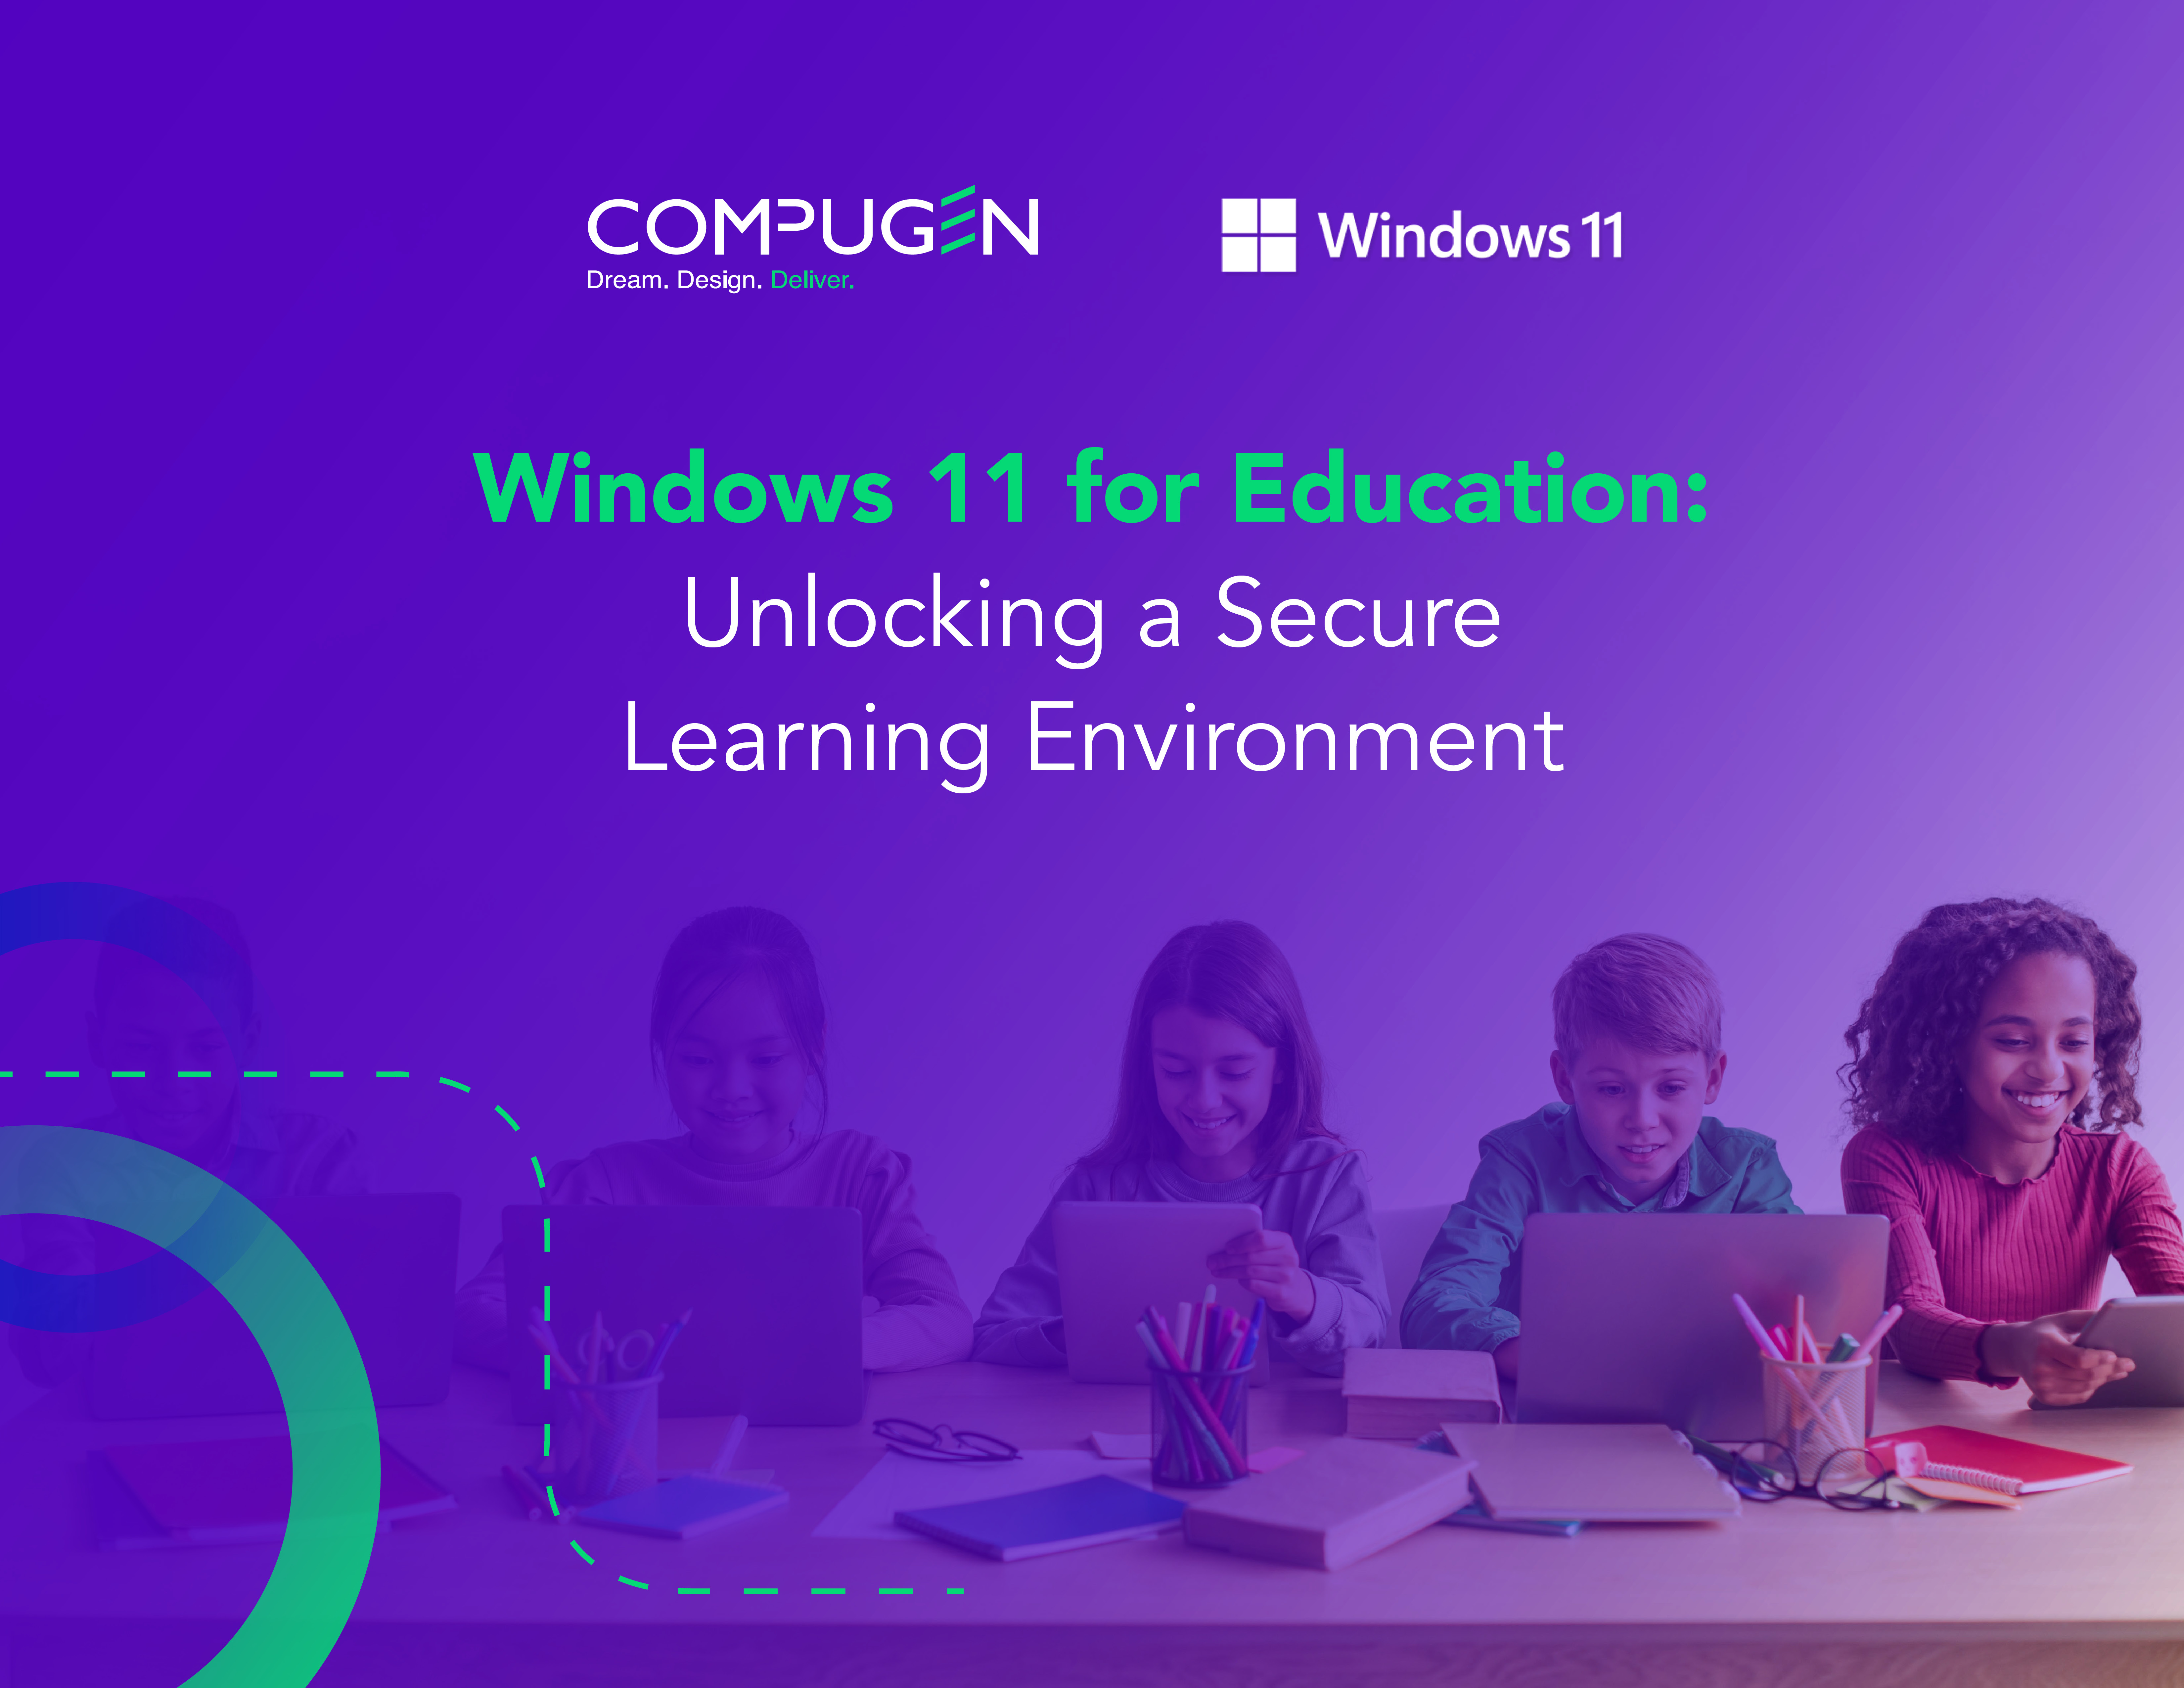 Unlocking a Secure Learning Environment